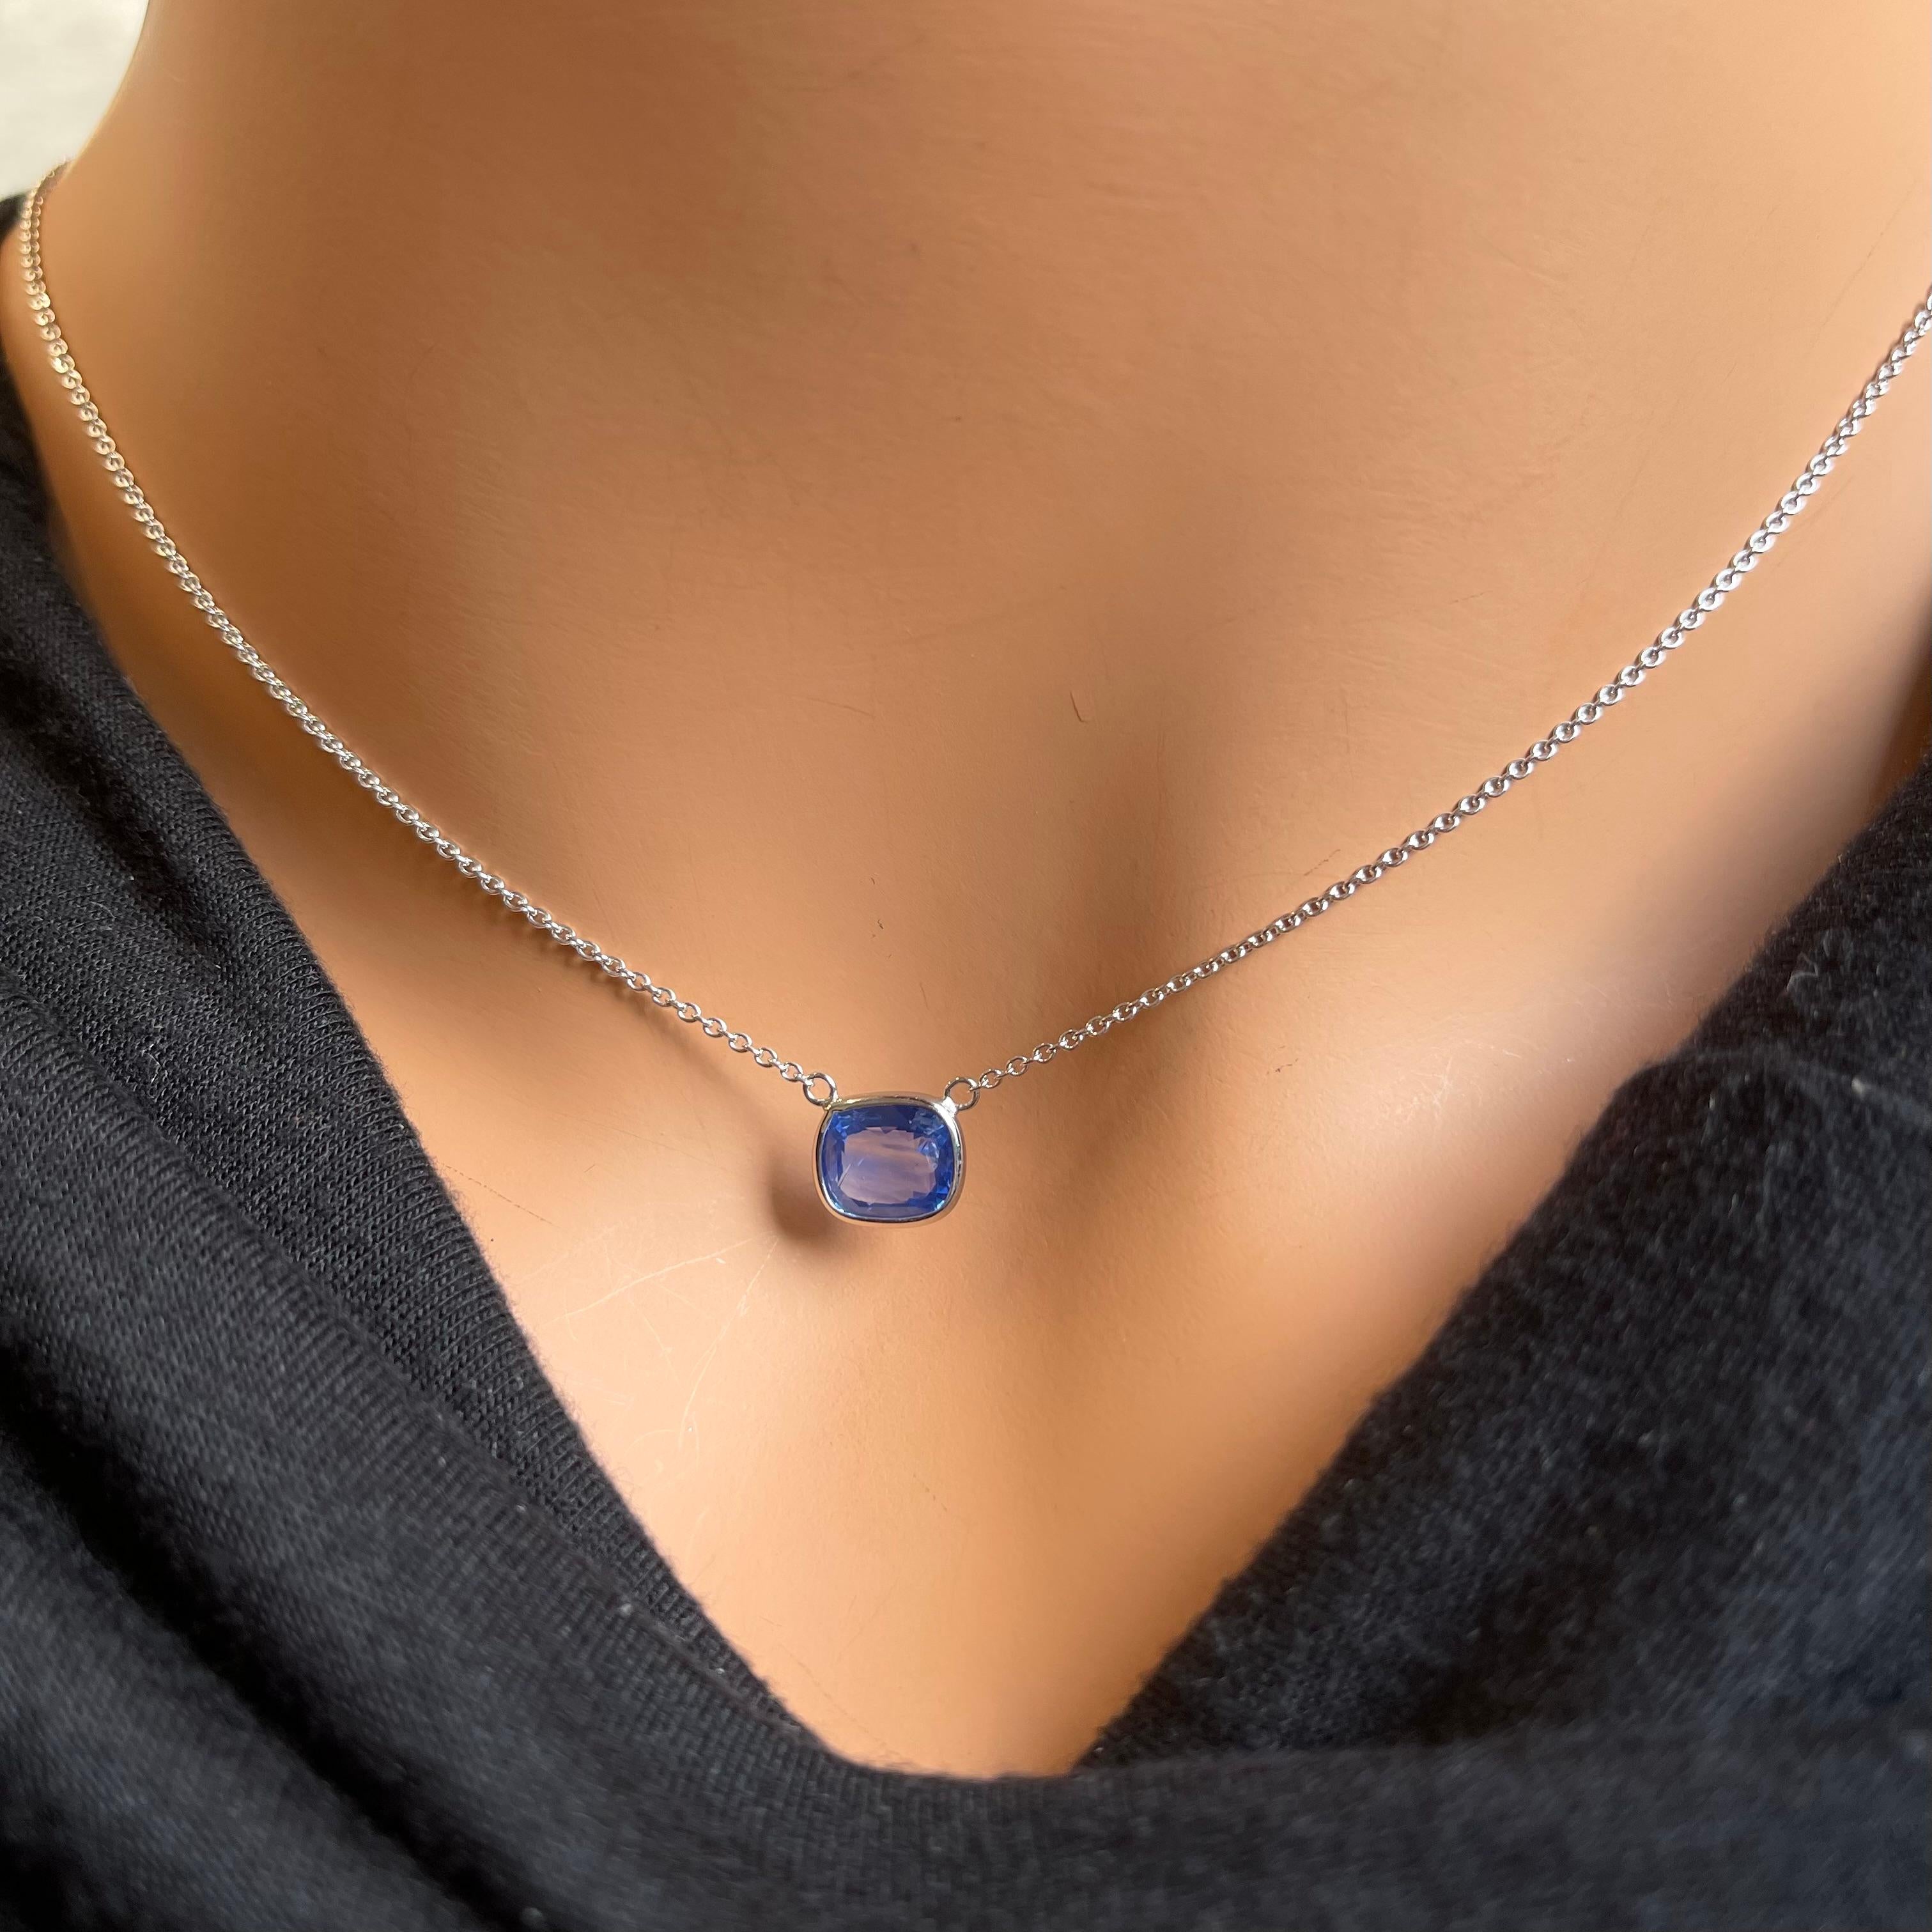 A fashion necklace made of 14k white gold with a main stone of a certified blue cushion-cut sapphire weighing 2.57 carats would be a stunning and sophisticated choice. Blue sapphires are renowned for their deep and mesmerizing color, and the cushion